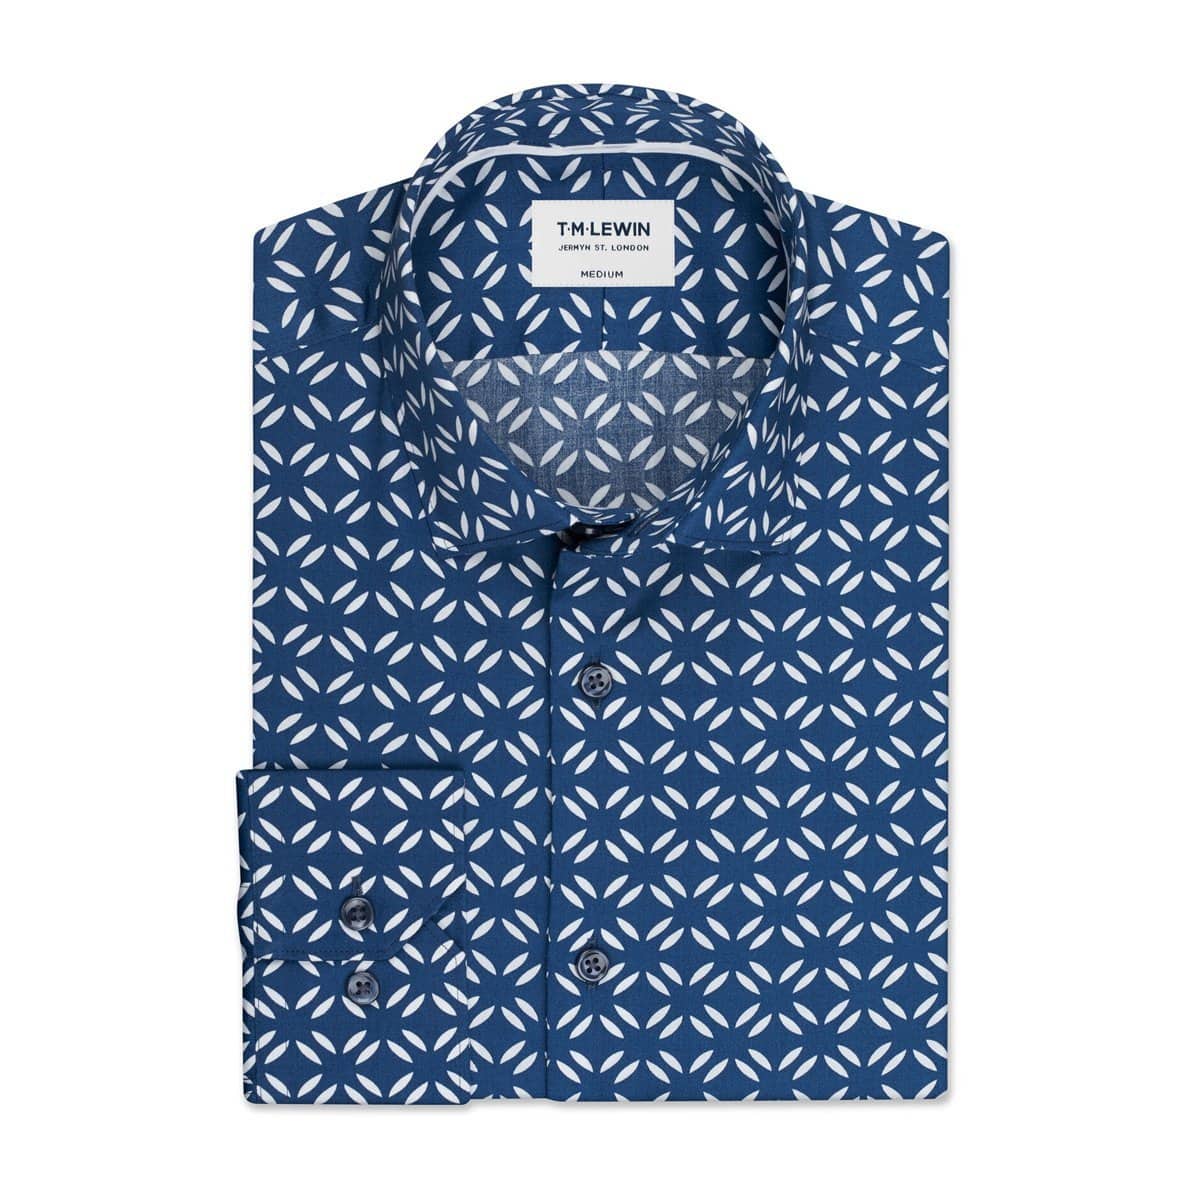 T.M.Lewin-Slim-Fit-Abstract-Beo-Shirt-Navy-and-White-72818-000